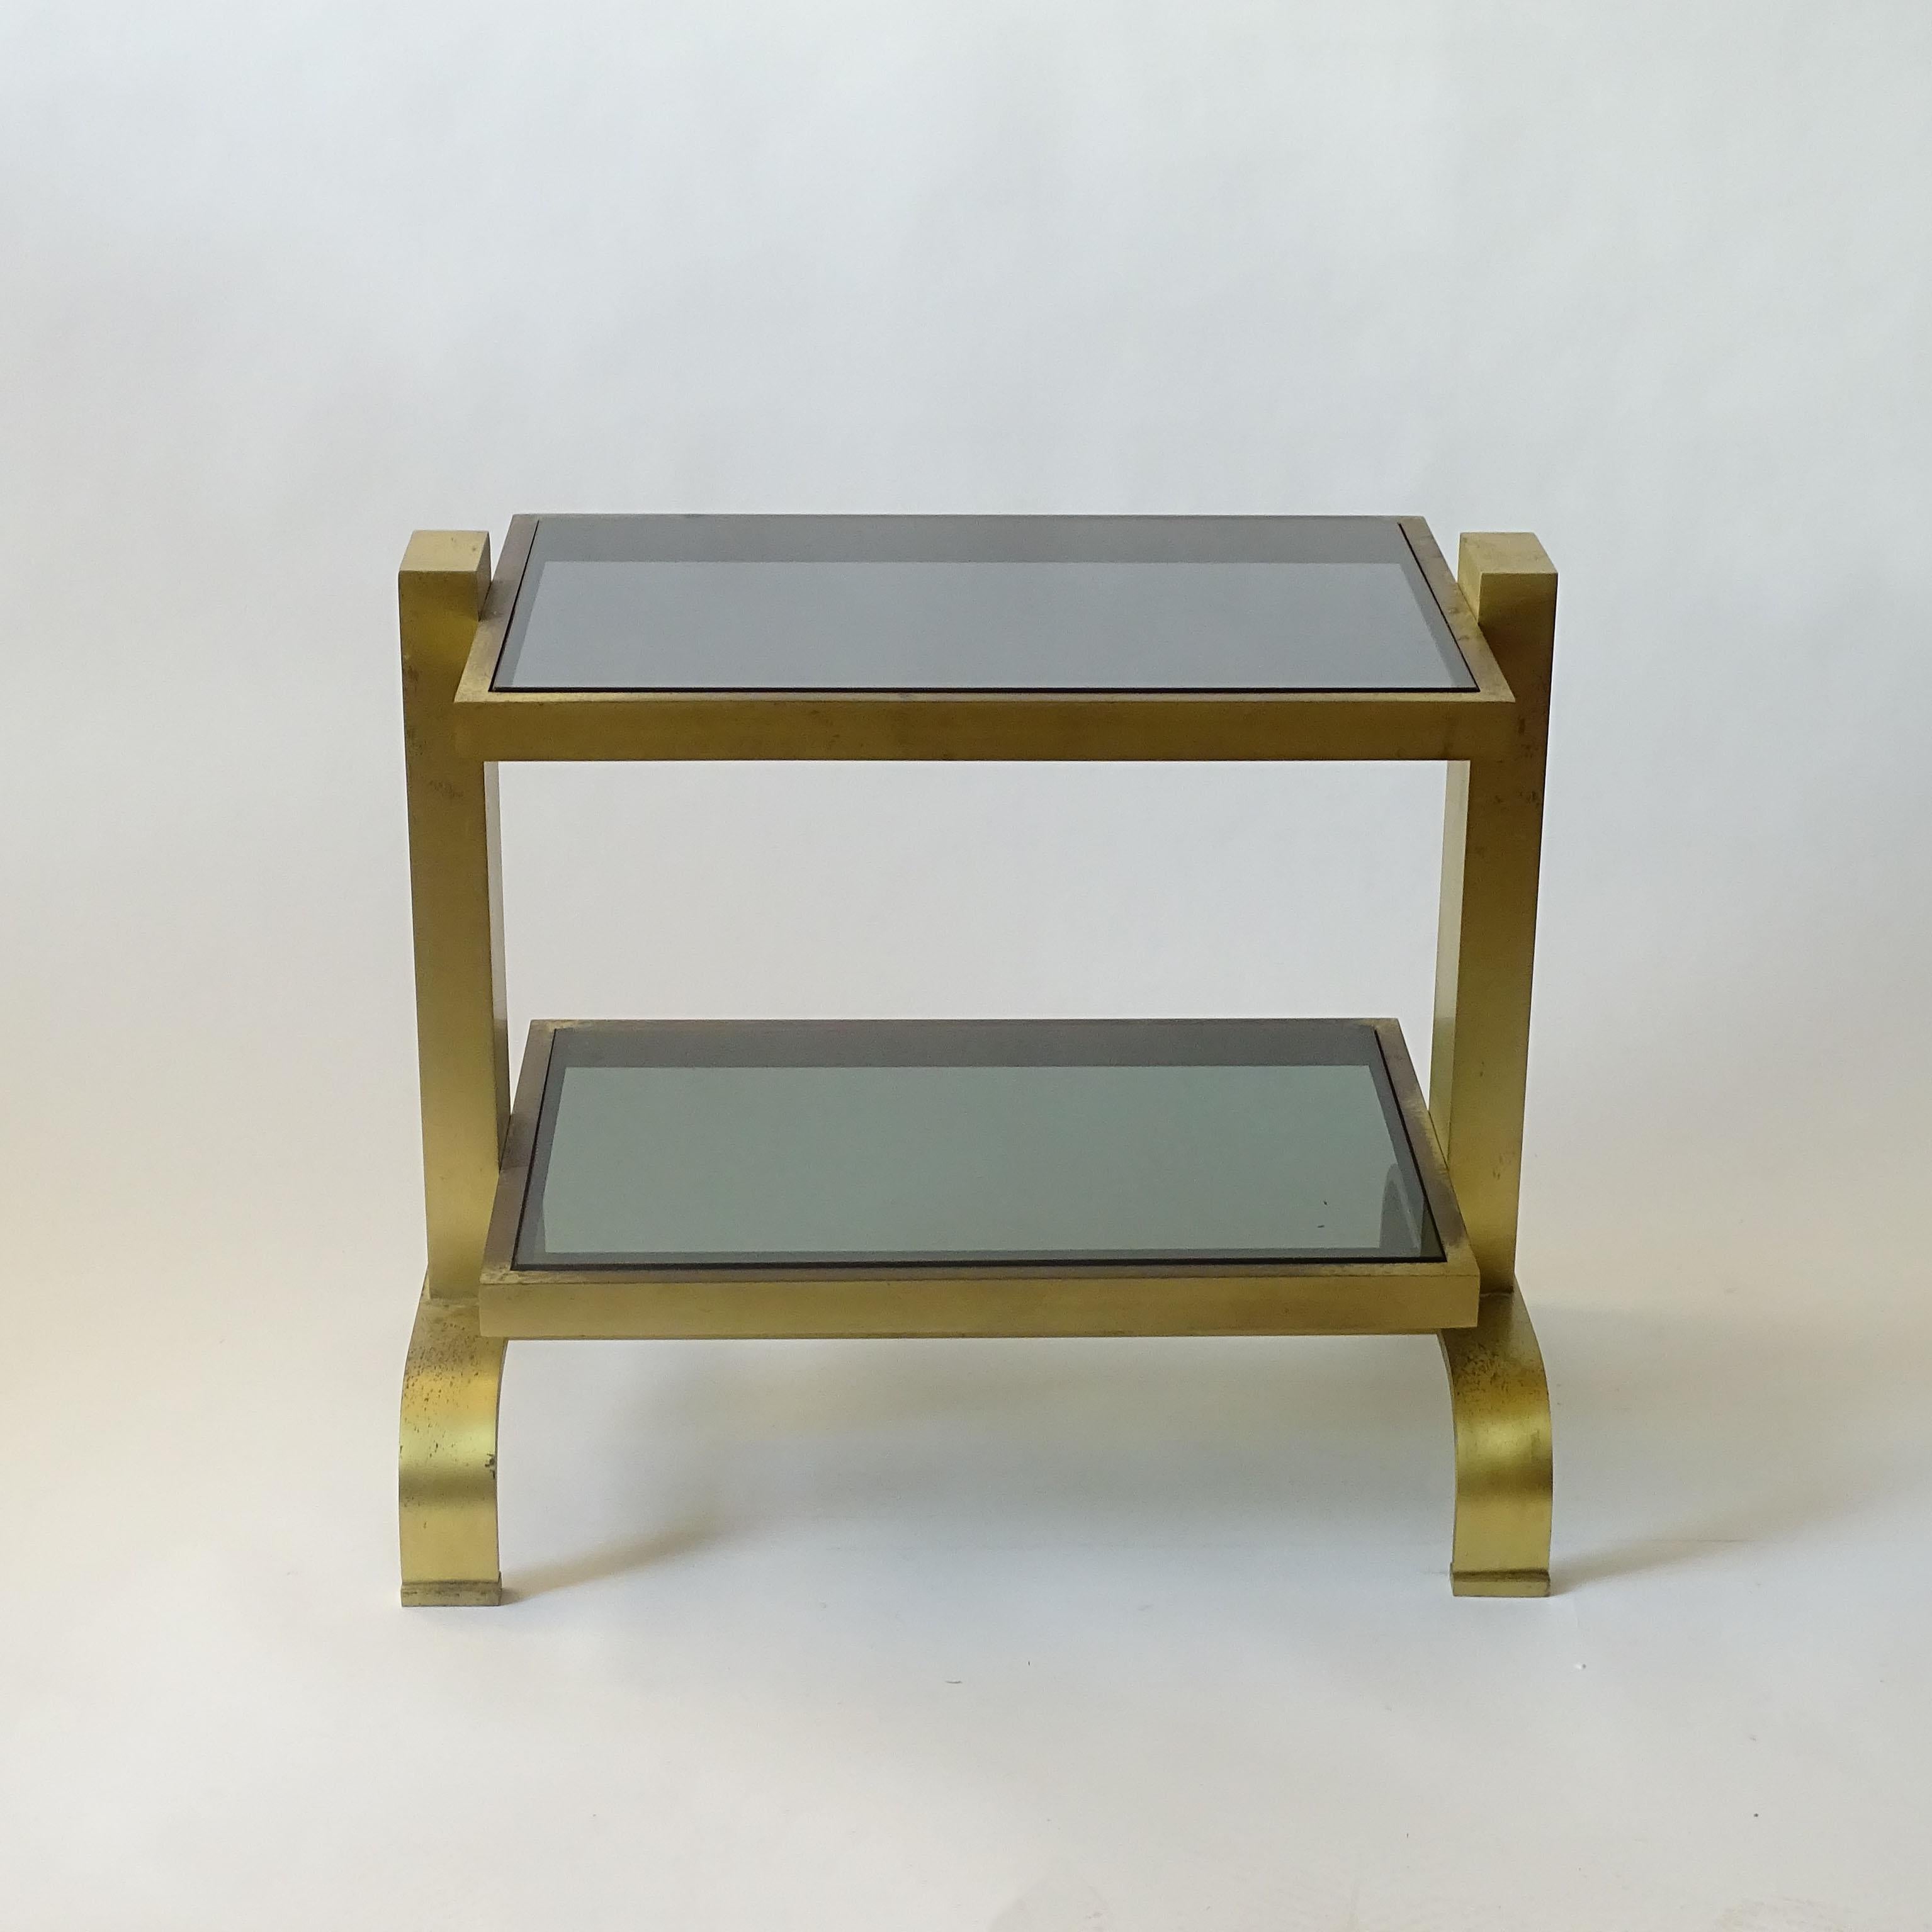 Sublime pair of Italian 1960s brass and glass bedside tables
Robust Art Deco-influenced design.
It carries different shades of grey glass on top and in the bottom.
